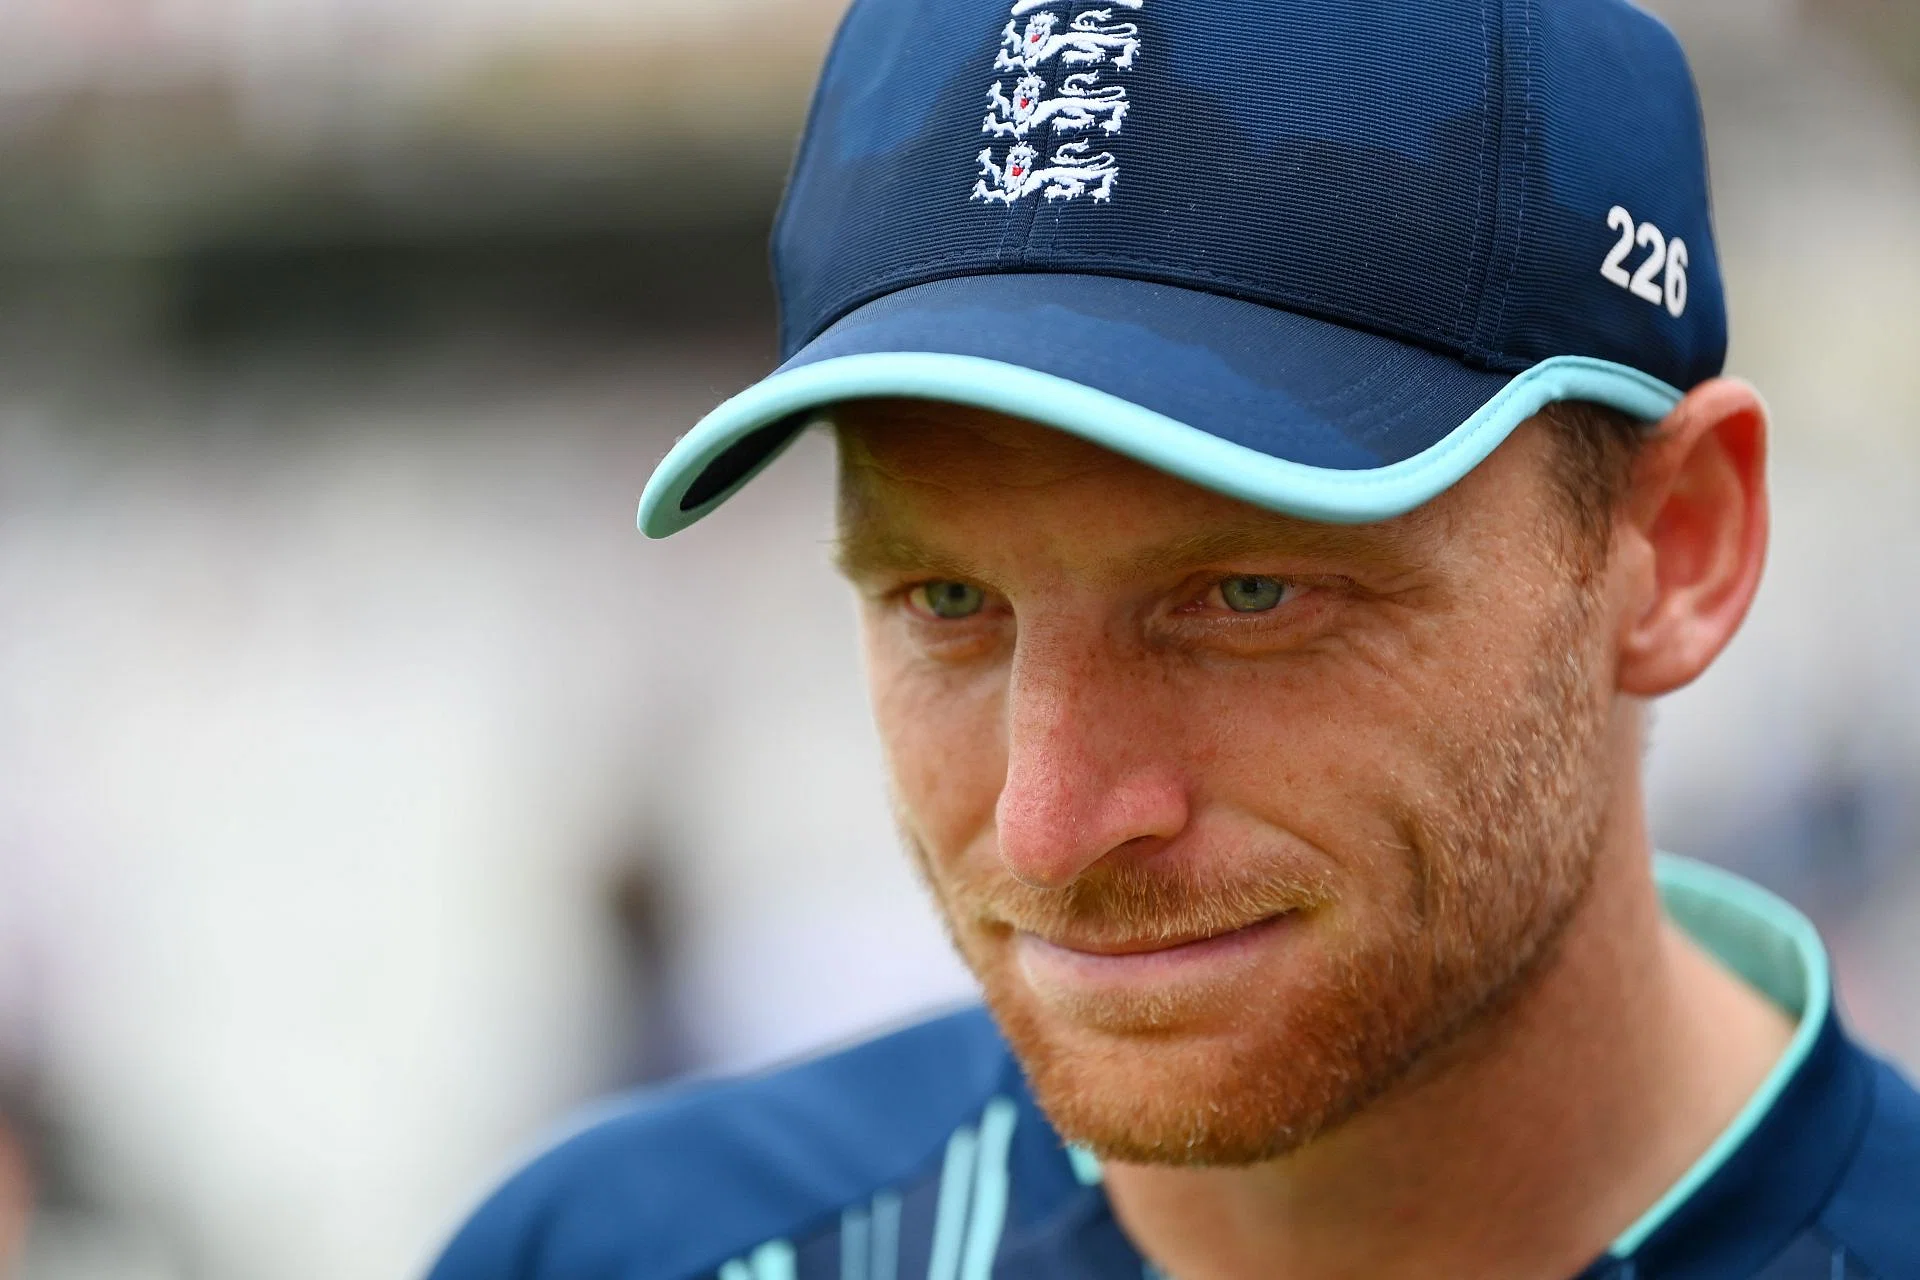 The head coach of the England cricket team Mathieumat has said that the England team management does not want to take a risk on Jos Buttler a